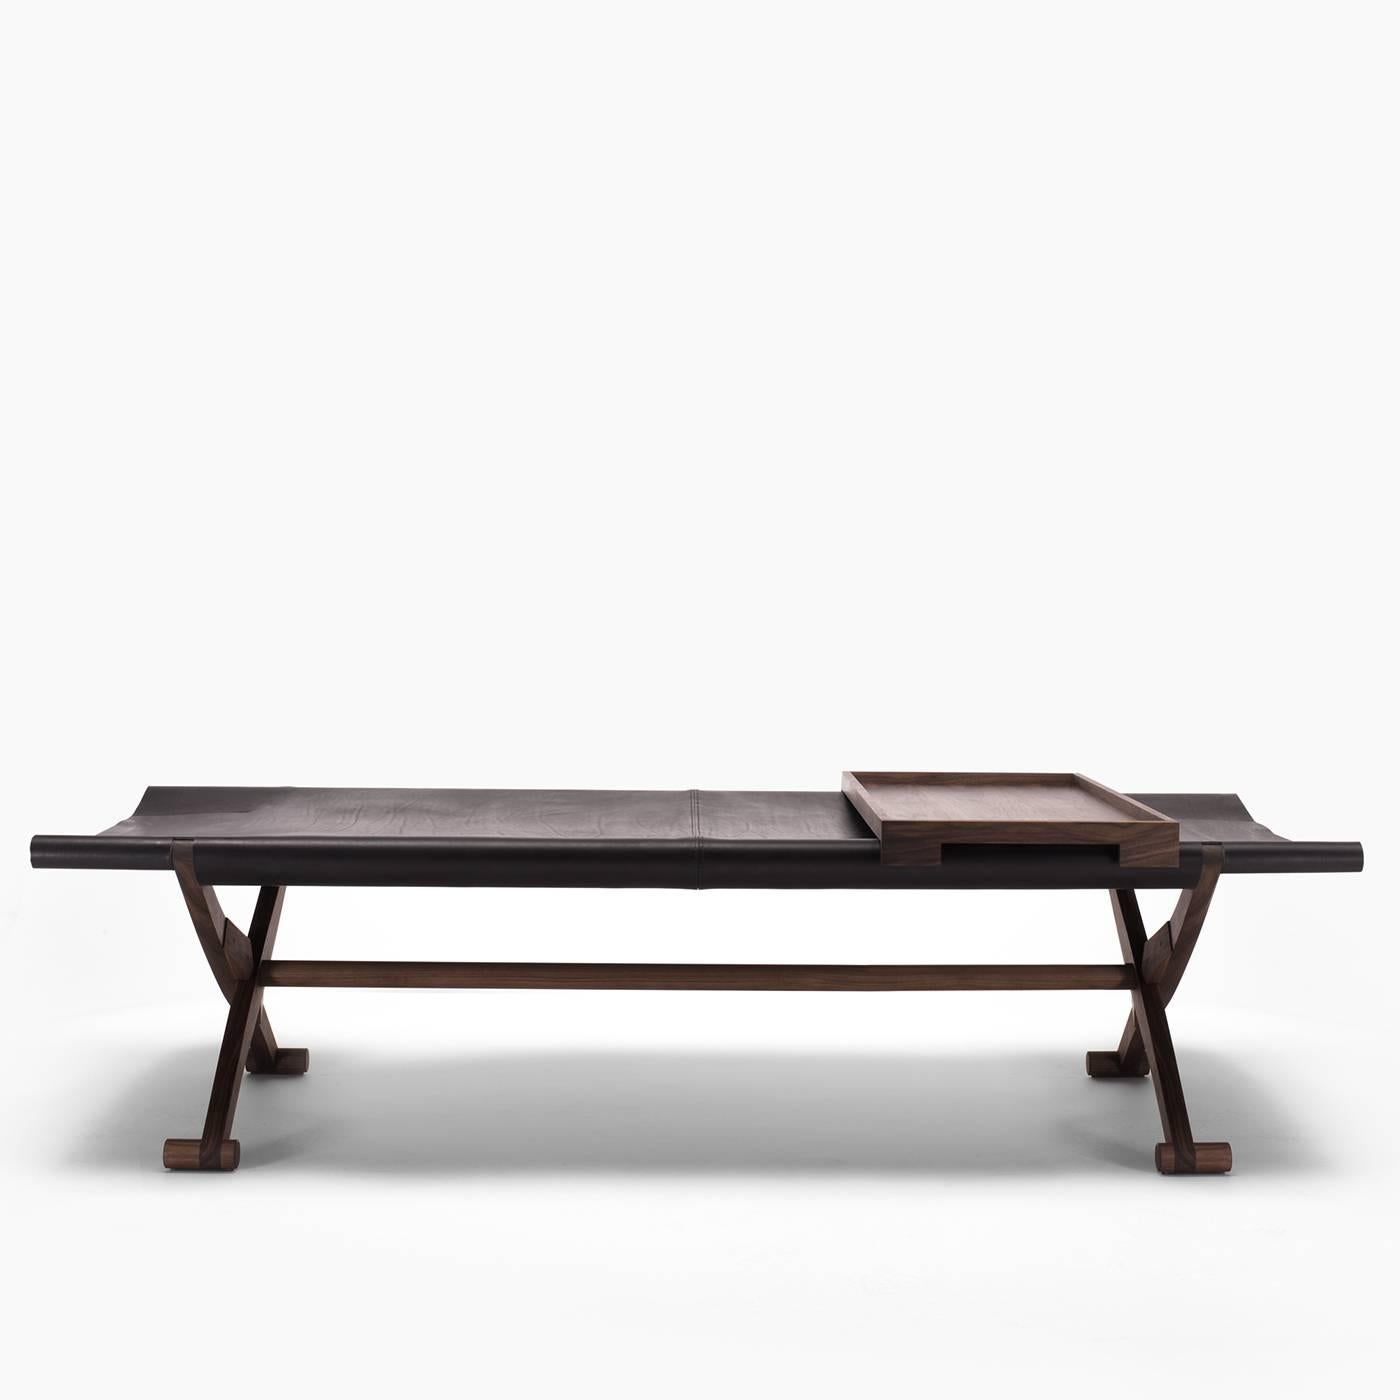 The origins of this product are as old as time, and most likely this was once a travel bed. This bench is made of solid black hickory, with a seat in full-grain leather. Branda can be folded for storage when not in use.